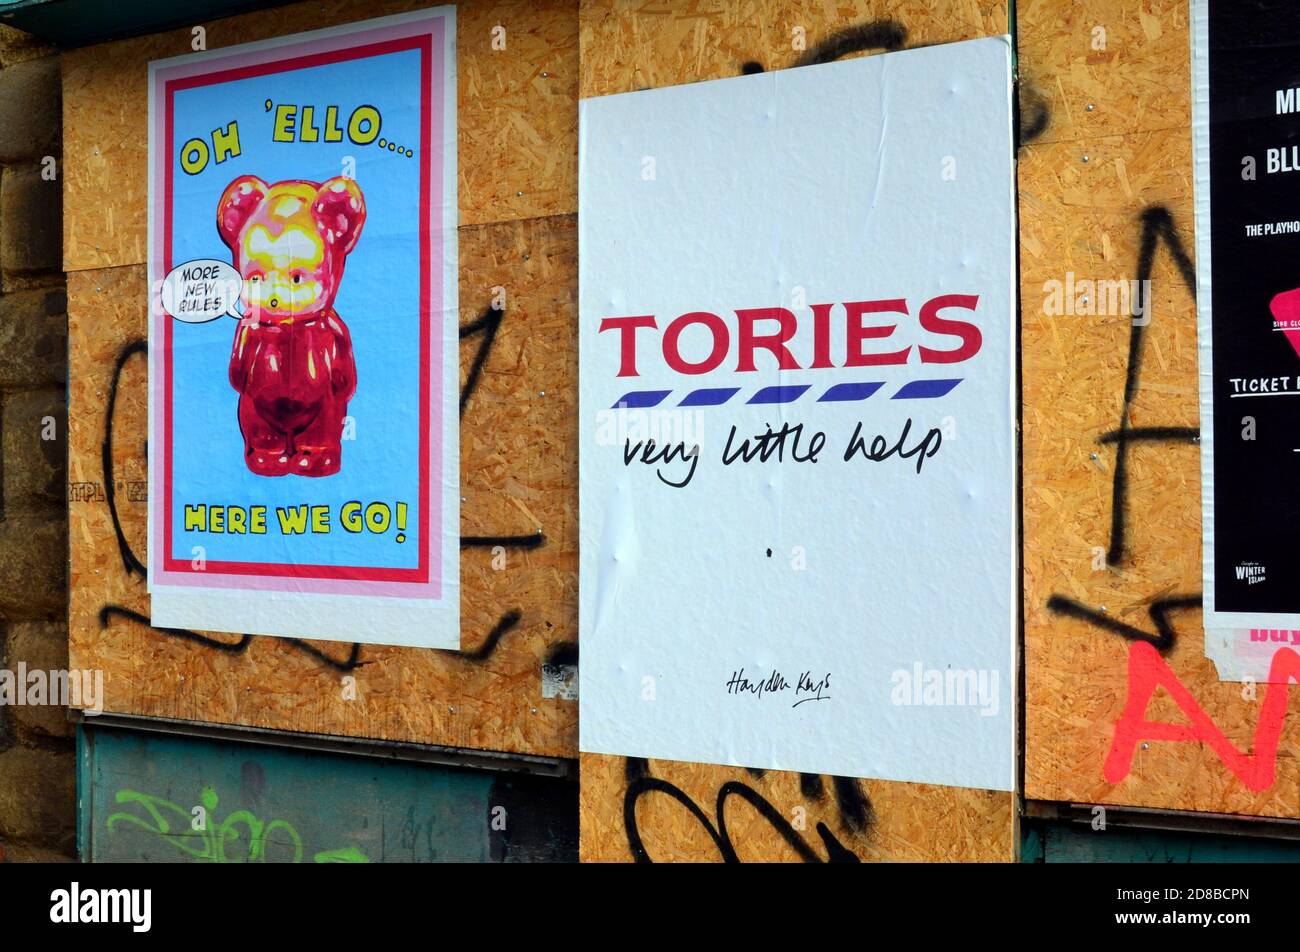 An Anti Tory poster, criticising the Conservative Party, in Manchester, Greater Manchester, England, United Kingdom, says: 'Tories Very Little Help'. This is in the context of the current  argument about whether the Government should do more to help feed children in England. MPs last week rejected a Labour Party motion to extend free school meals until Easter 2021 in order to stop children going hungry. The poster is in the style of a well known supermarket chain. Stock Photo